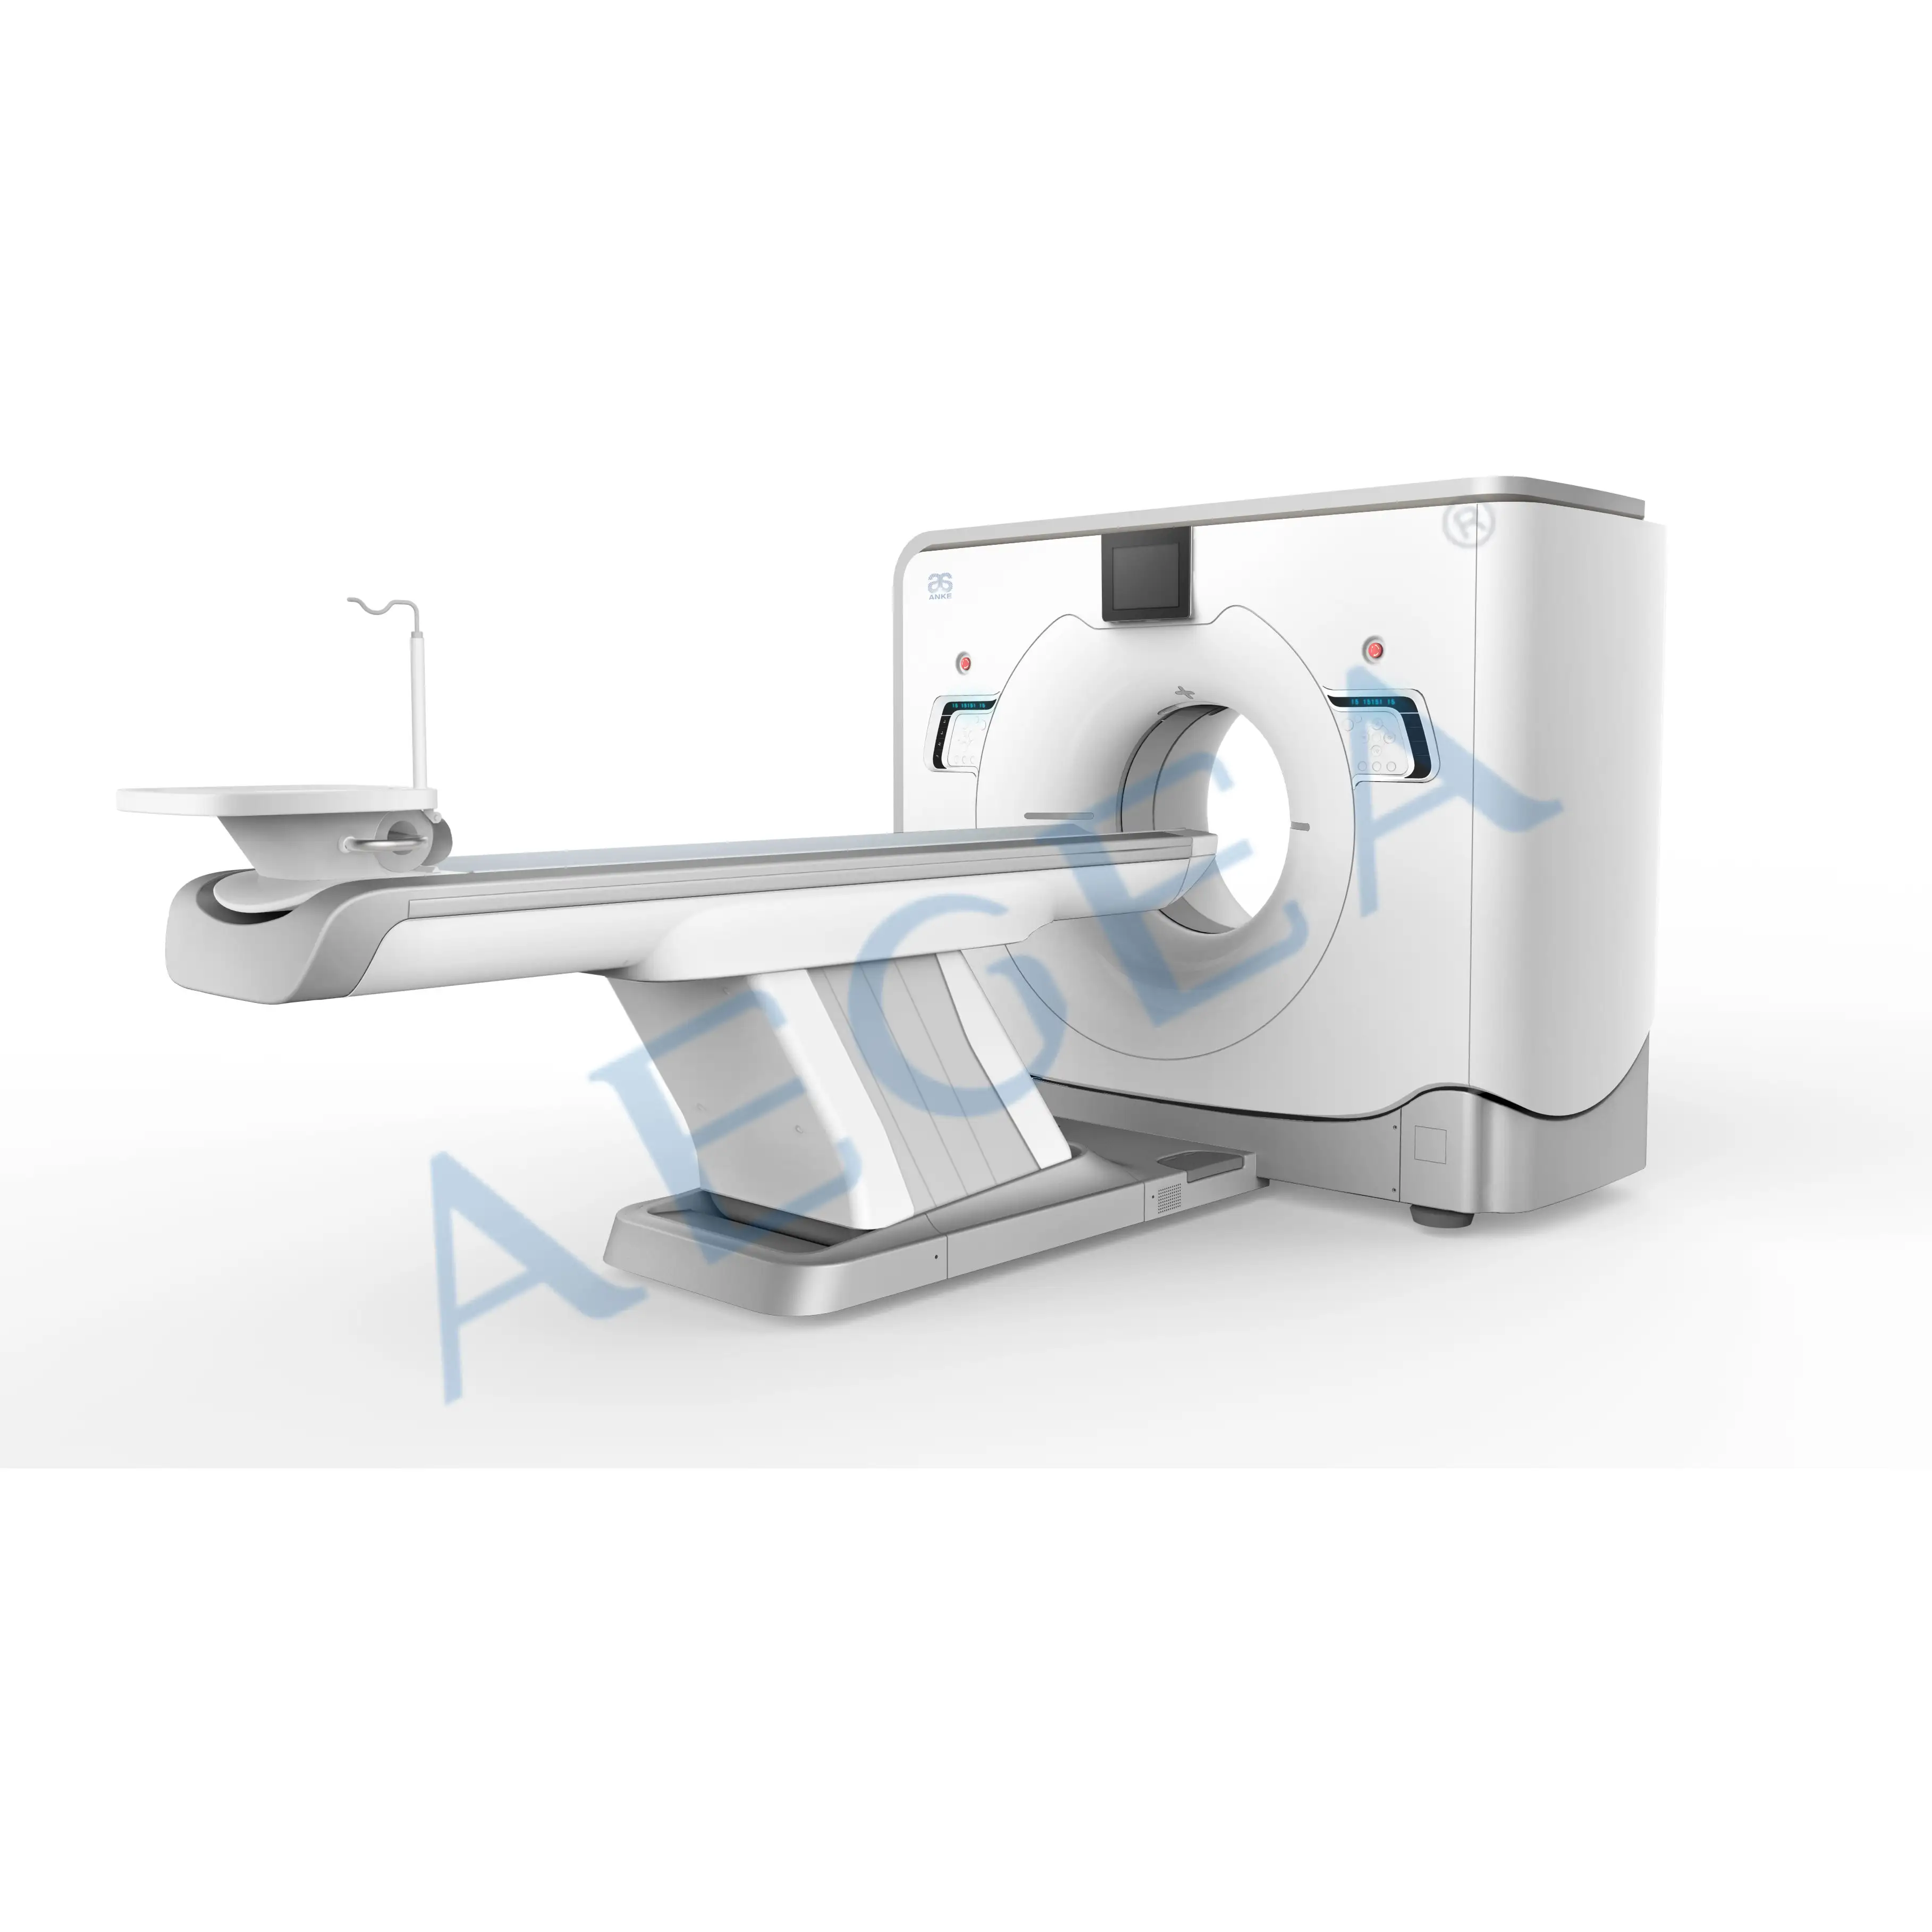 AG-CT64C clinical applications 64 slices ct scanner machine for hospital